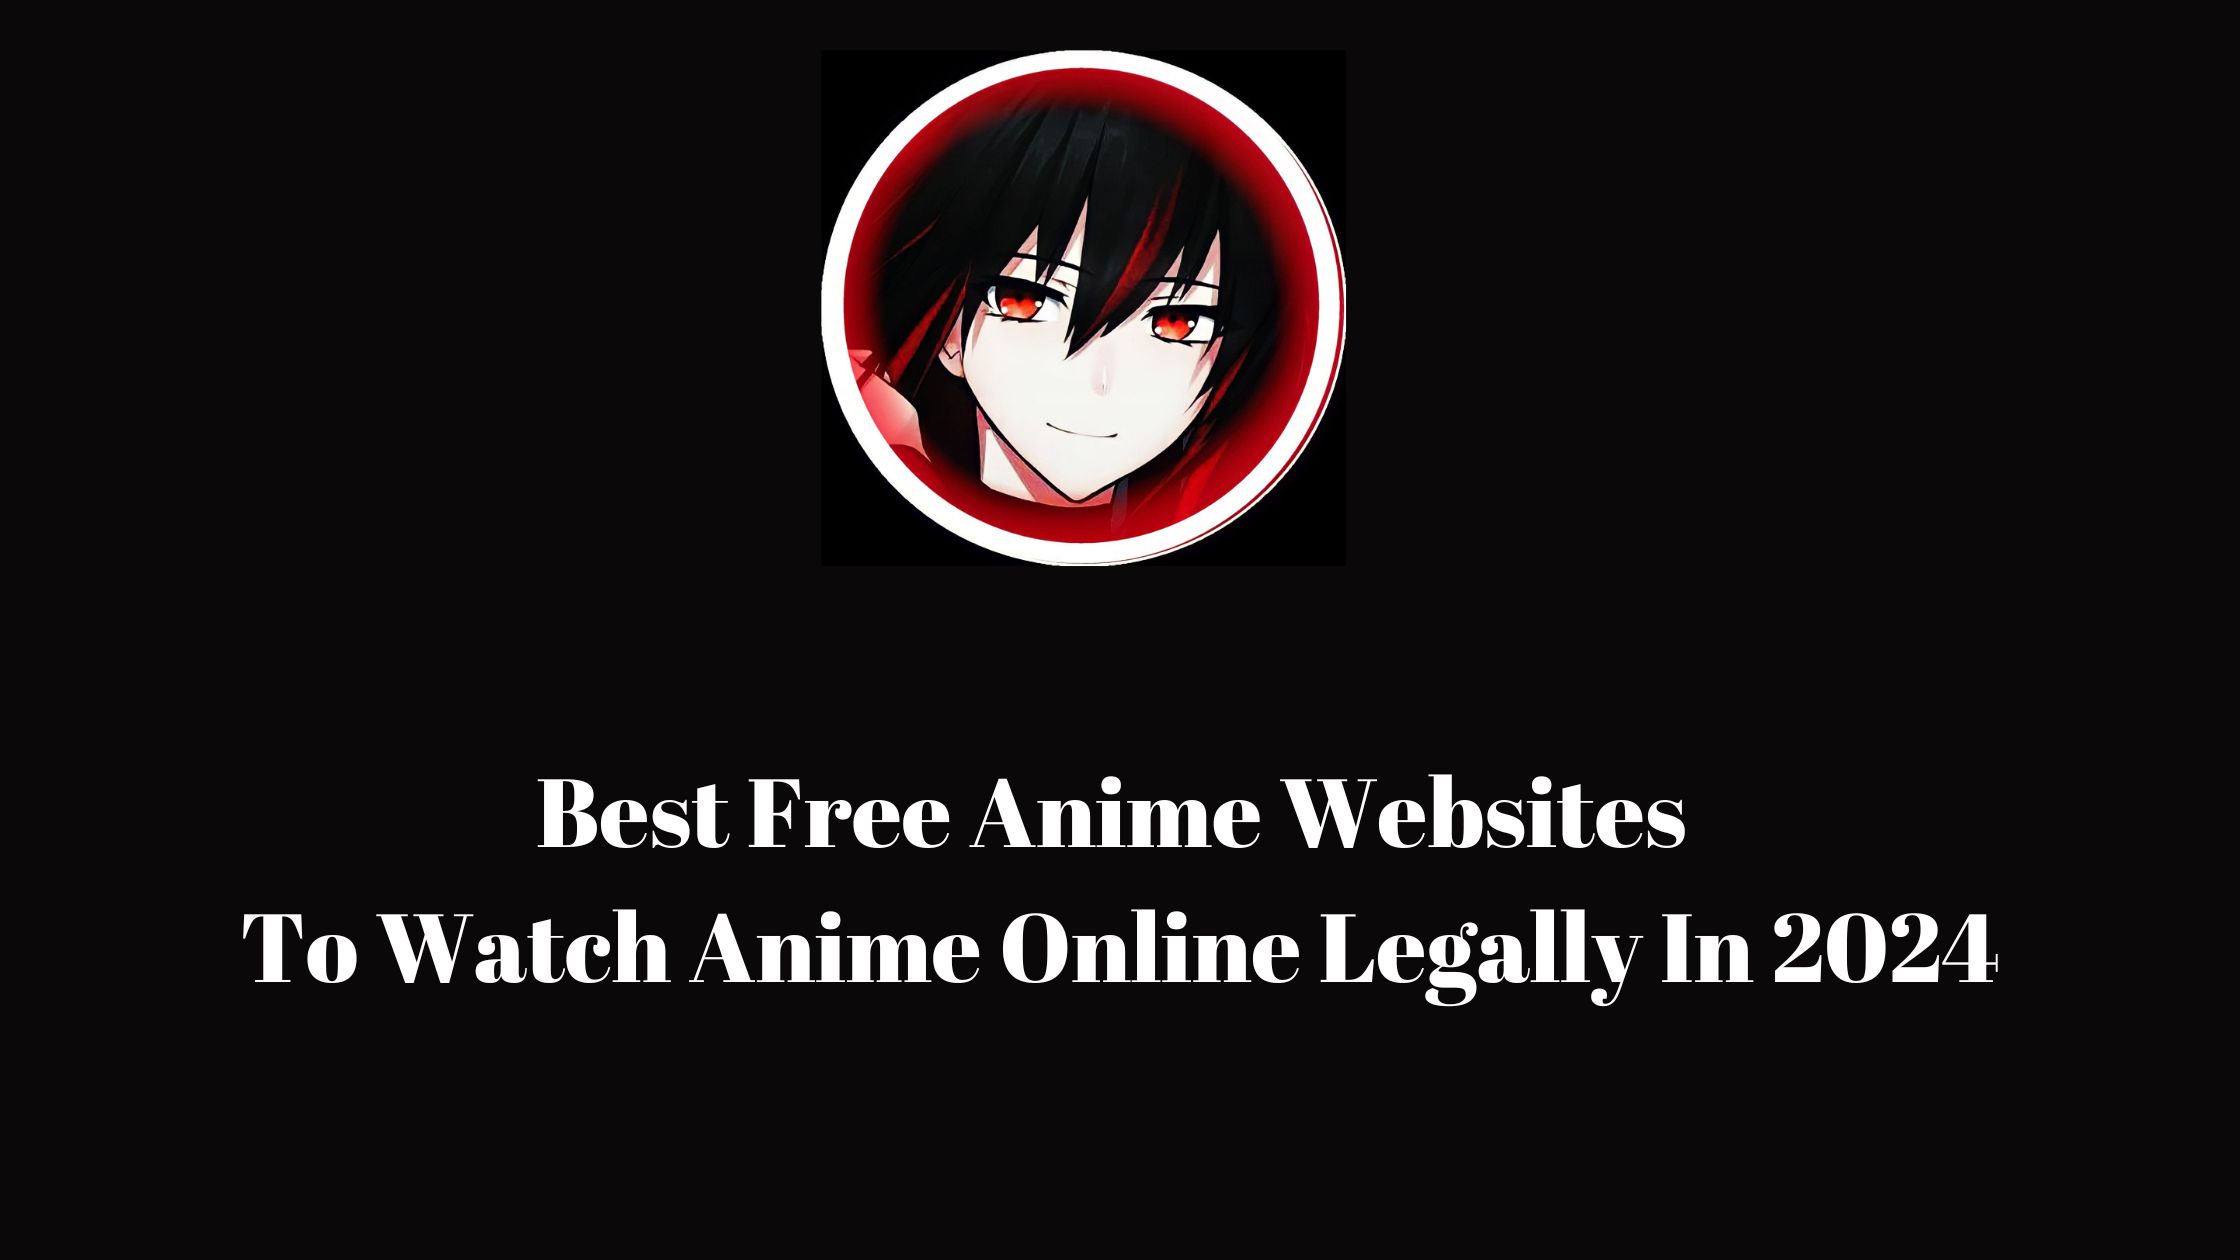 Best Free Anime Websites To Watch Anime Online In 2024